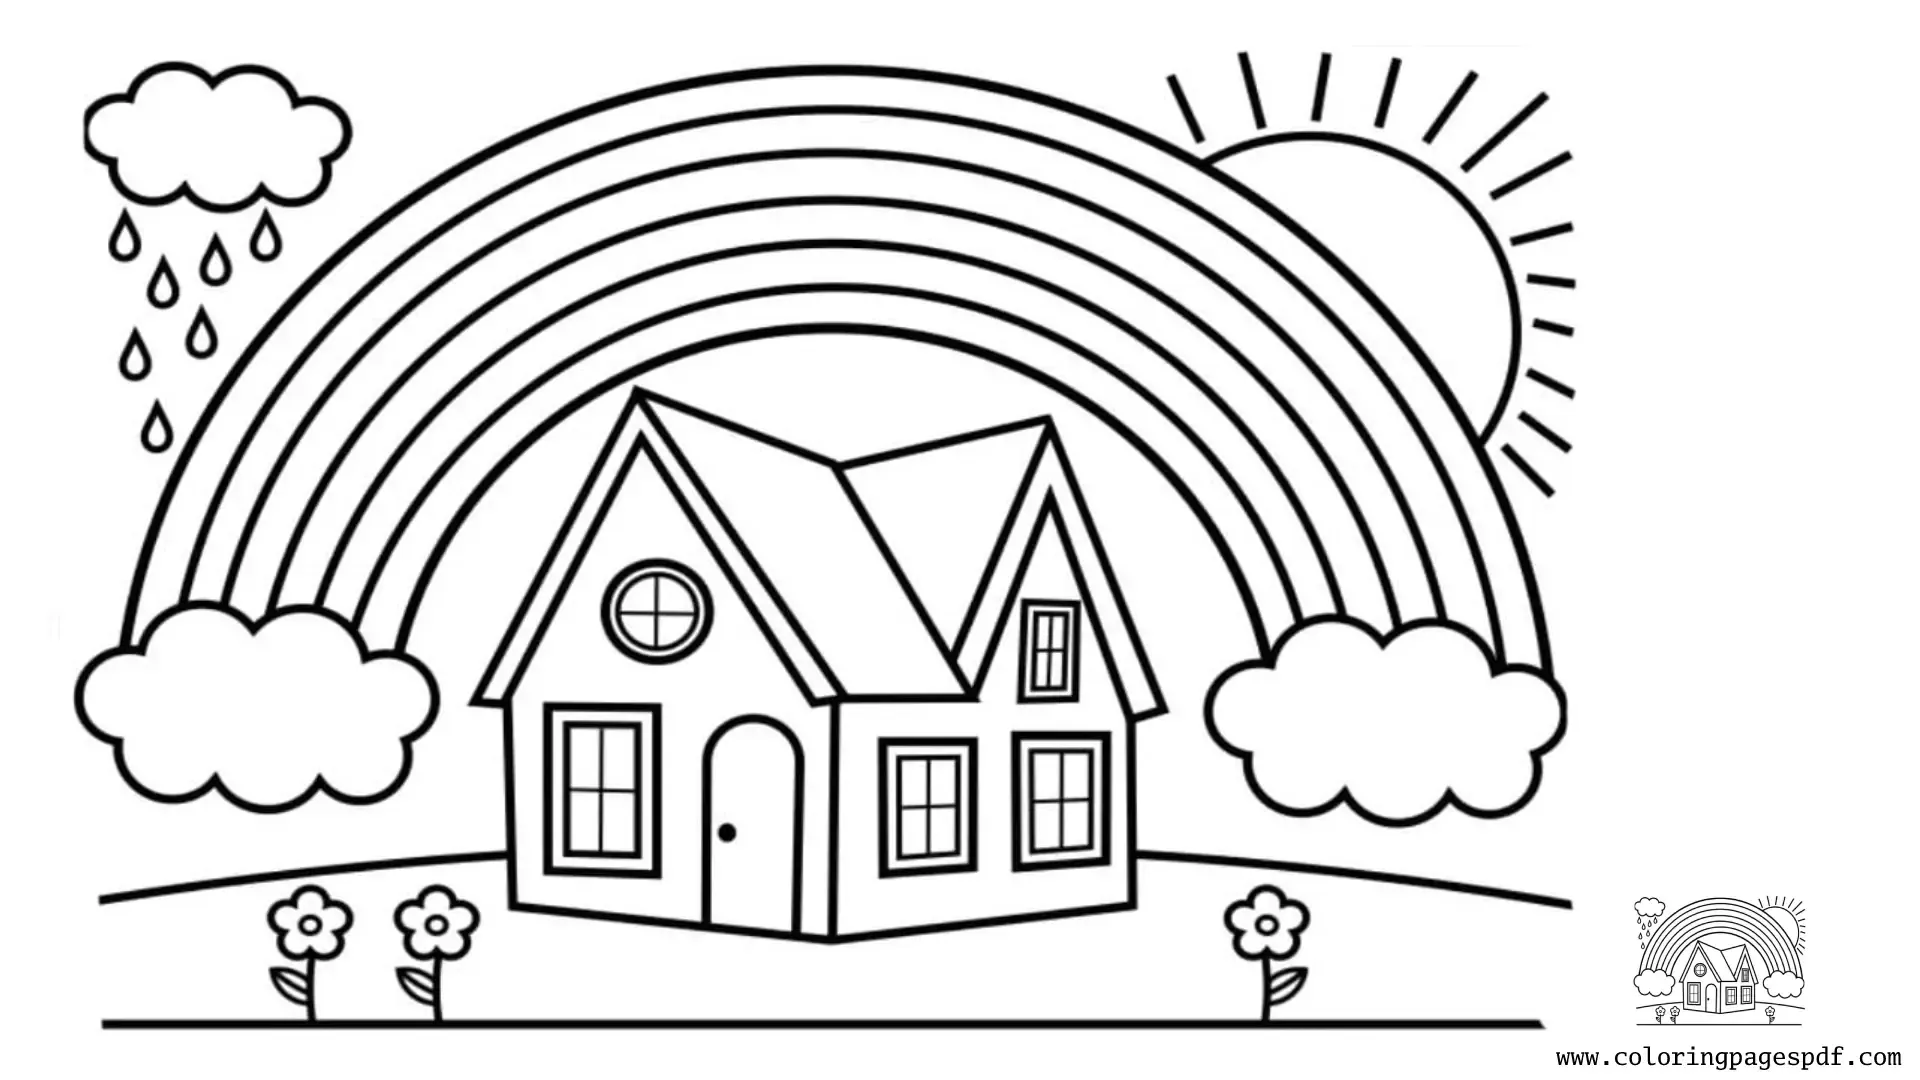 Coloring Pages Of A Rainbow Behind A House